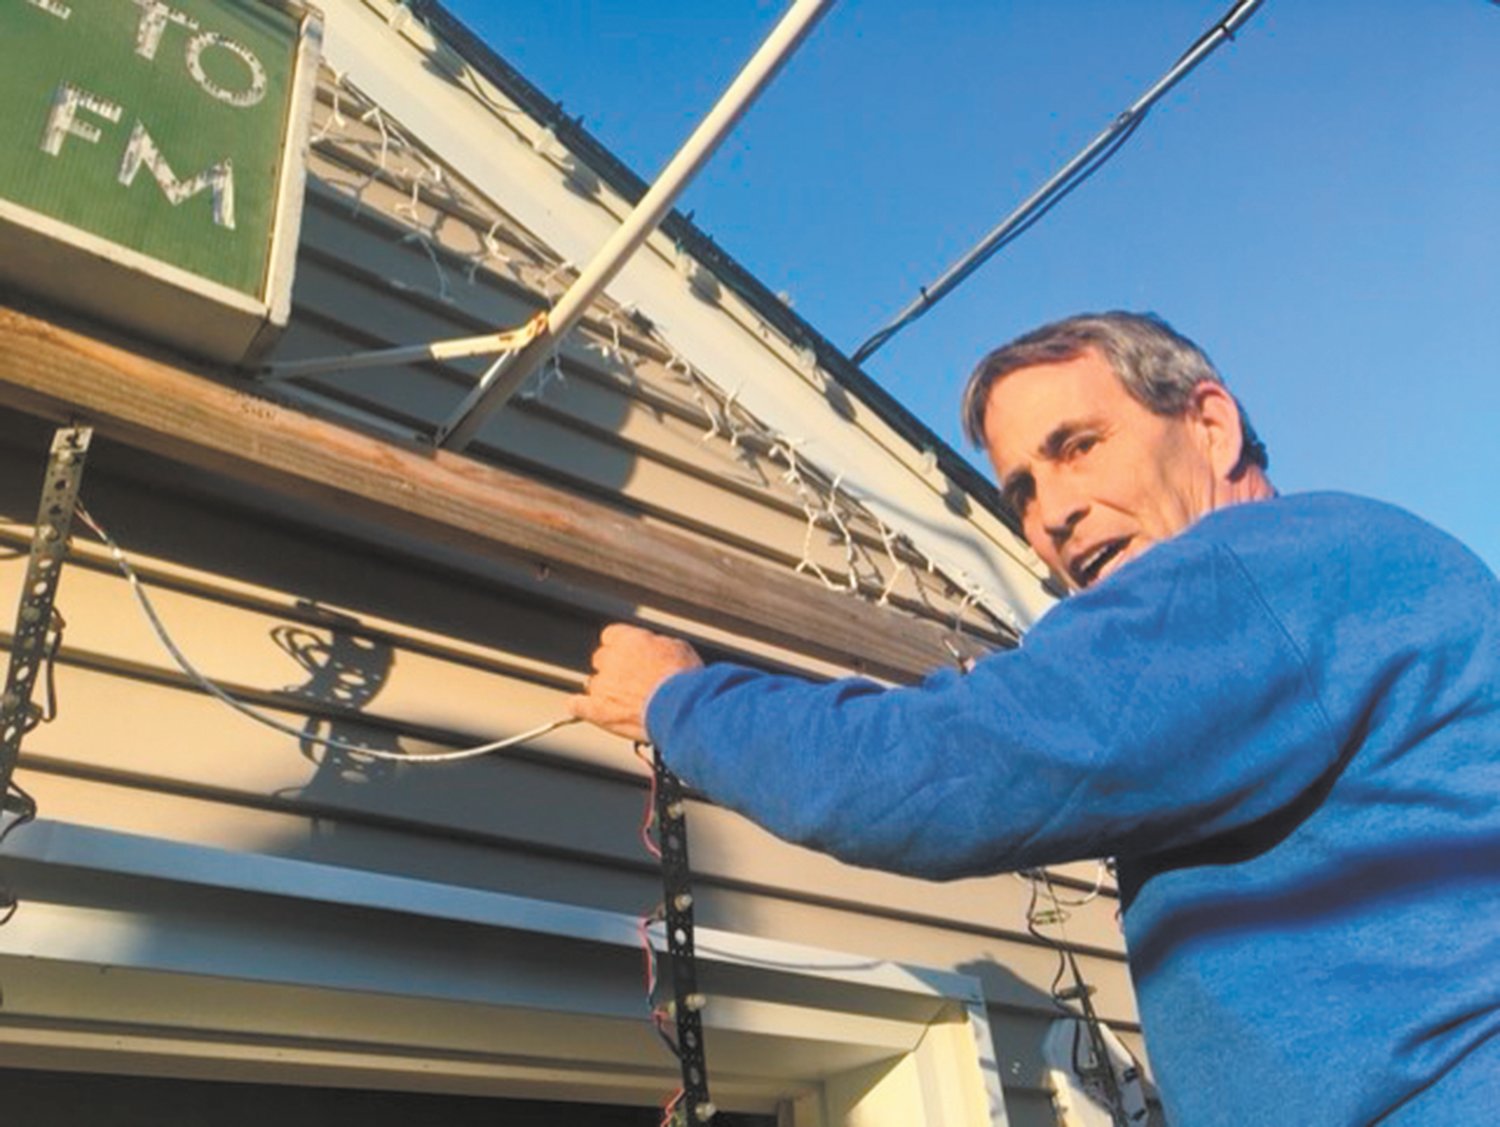 A DAY OF LIGHTS: With City Hall closed and being an independent and unopposed for reelection, Mayor Frank Picozzi turned his attention to installing and trouble shooting his home digital Christmas light show that he says will make its debut on Black Friday.